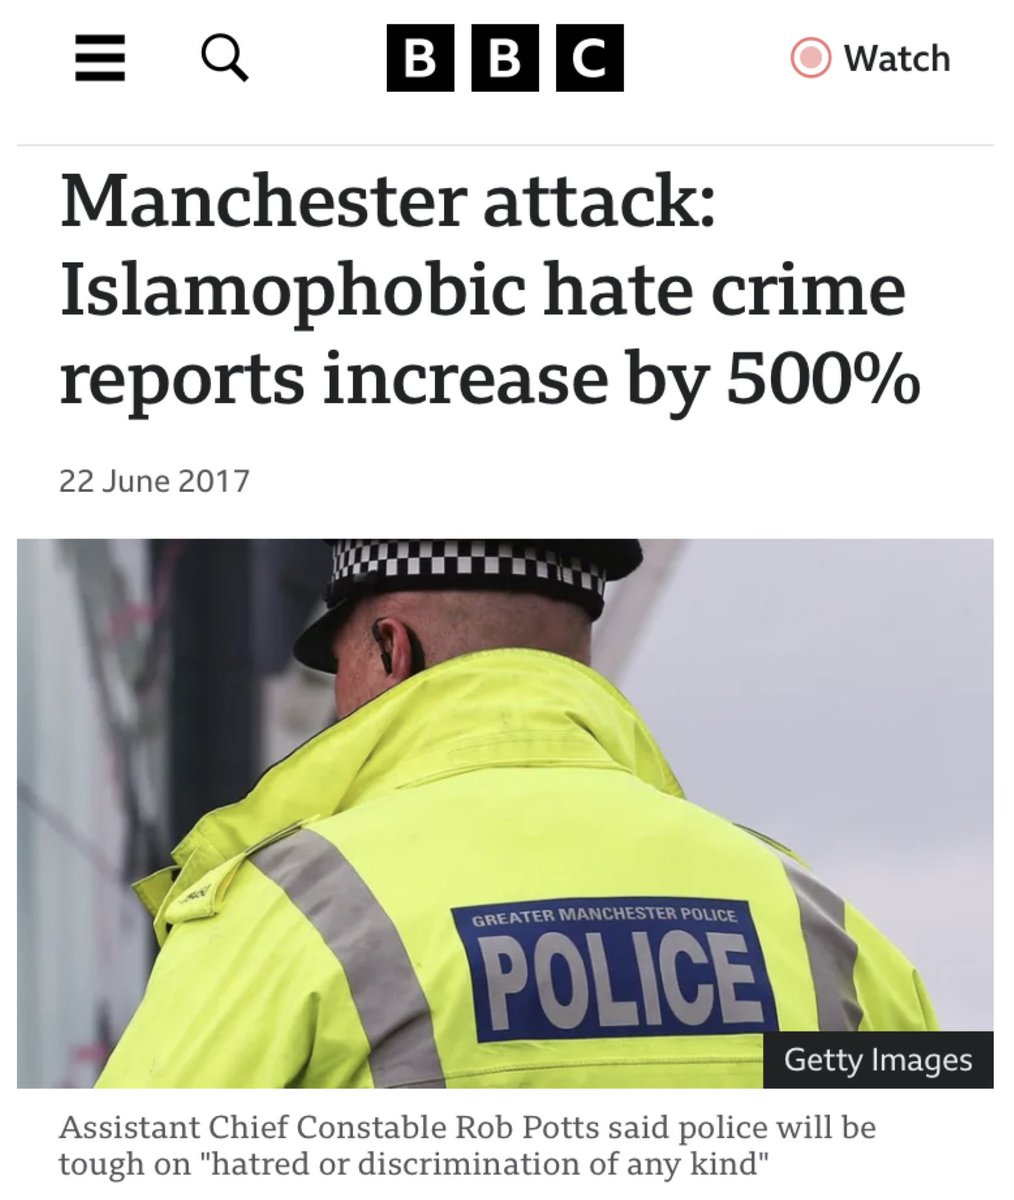 Seven years ago today, British-born Salman Abedi detonated a bomb at an Ariana Grande concert in Manchester, England. 22 people died and 116 more were injured. Not too long after this horrific act of failed multiculturalism, the BBC's reporting on the terrorism shifted to this...